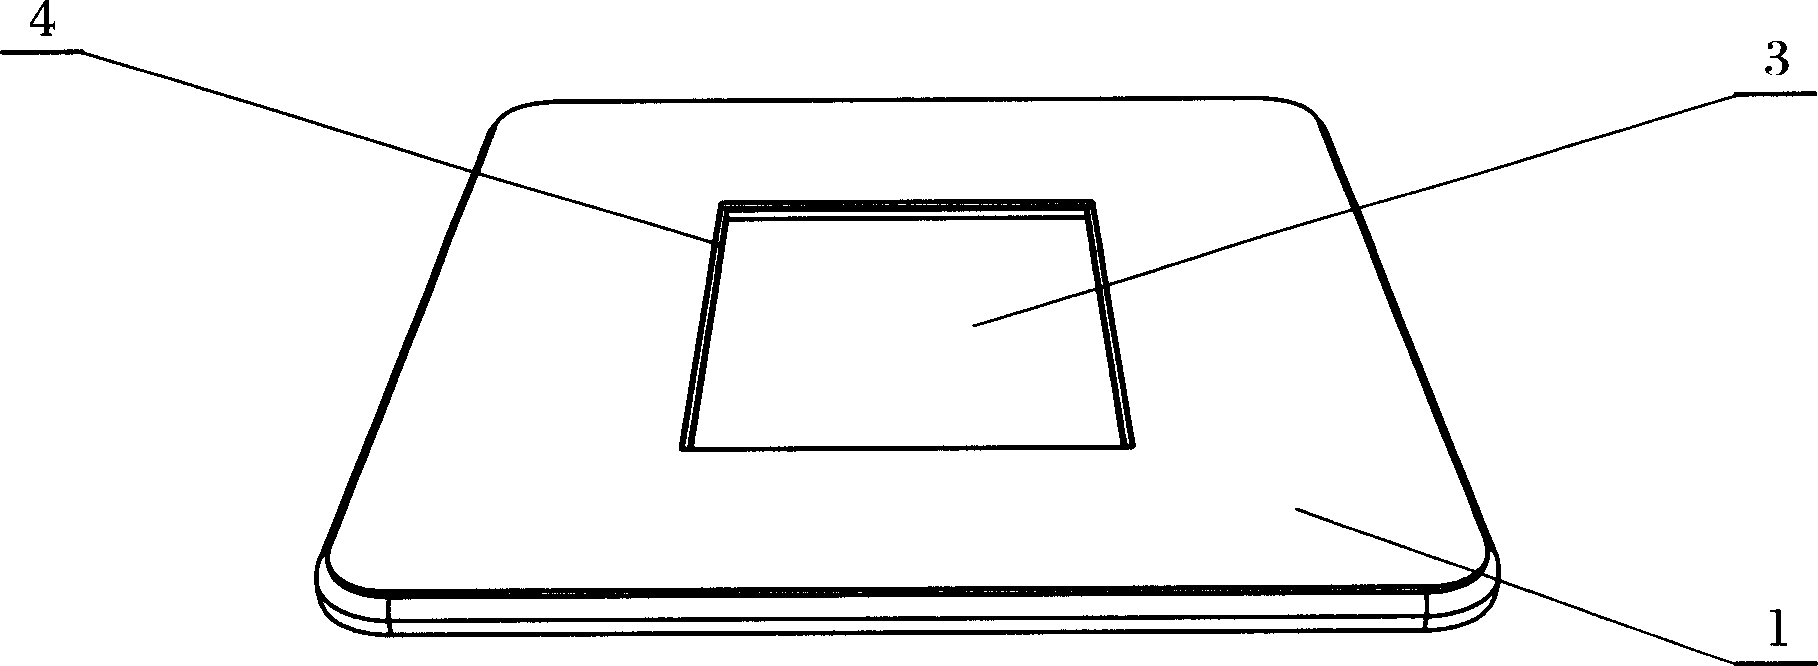 Electromagnetic oven panel structure